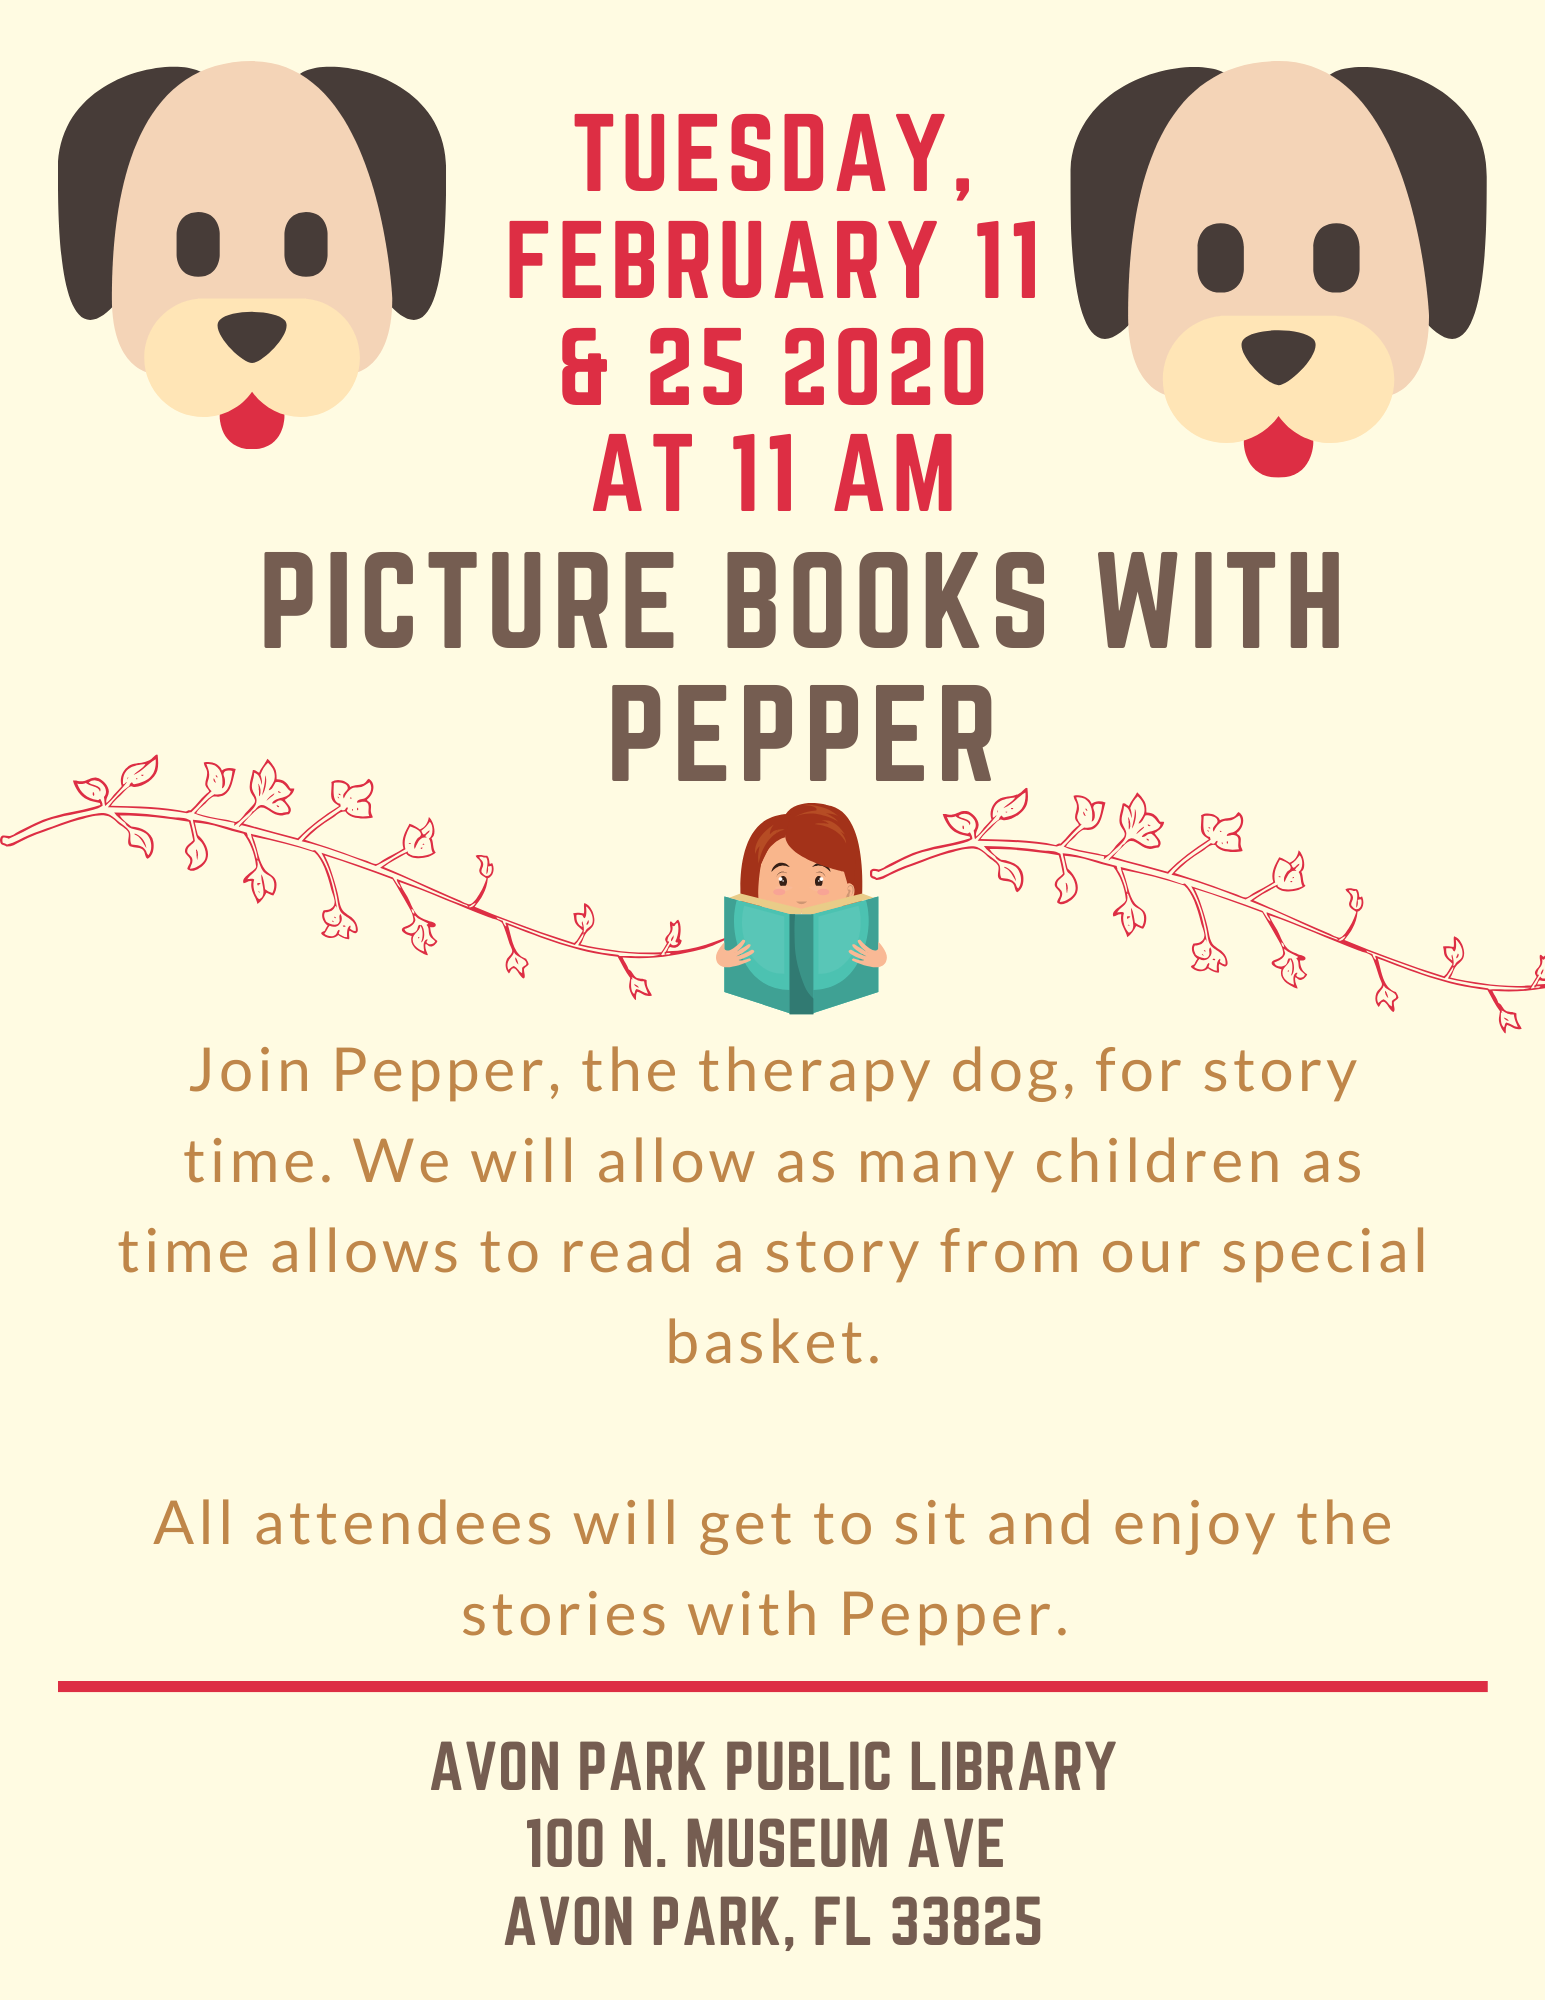 Pepper returns tomorrow at the Avon Park Public Library for Picture books with Pepper, trained therapy dog. Program will begin at 11:00 AM on Tuesday, February 11 and again on Tuesday, February 25, 2020. We can't wait to see you there!